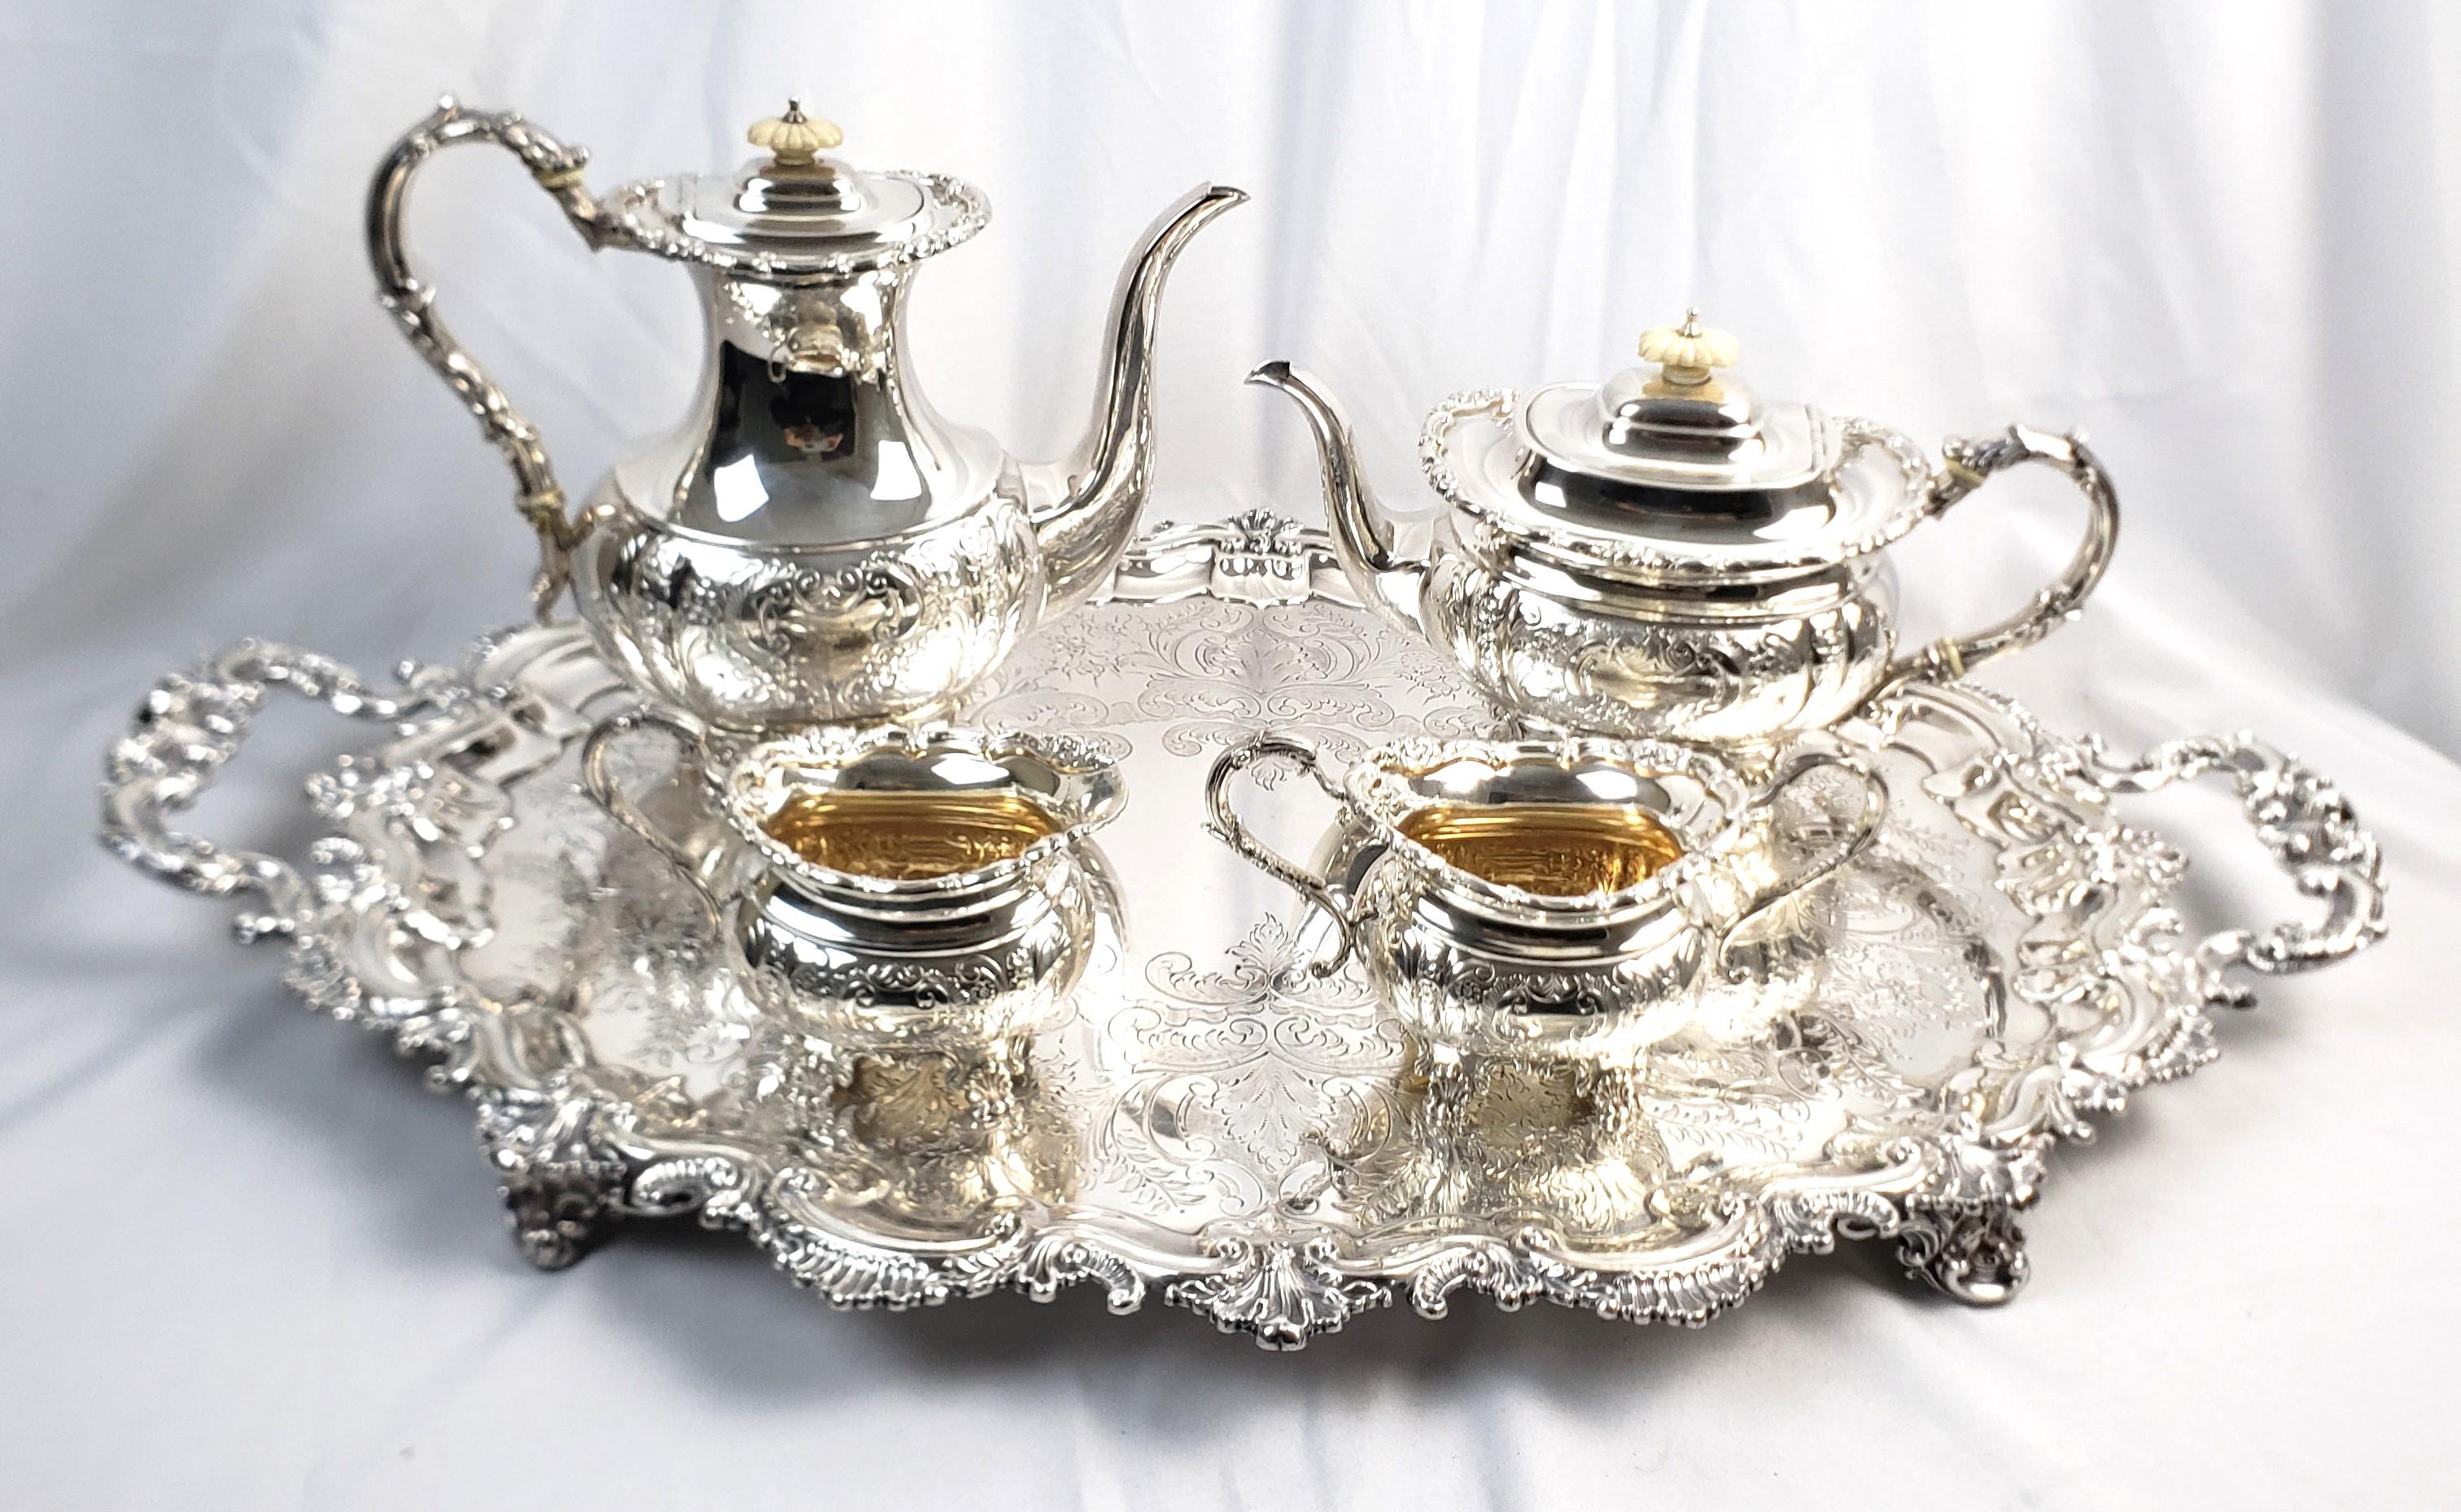 This antique tea set was made by and unknown maker, but the set and the tray originate from England and date to approximately 1850 and done in the period Victorian style. The four piece tea set is done in sterling silver and the handles and bases